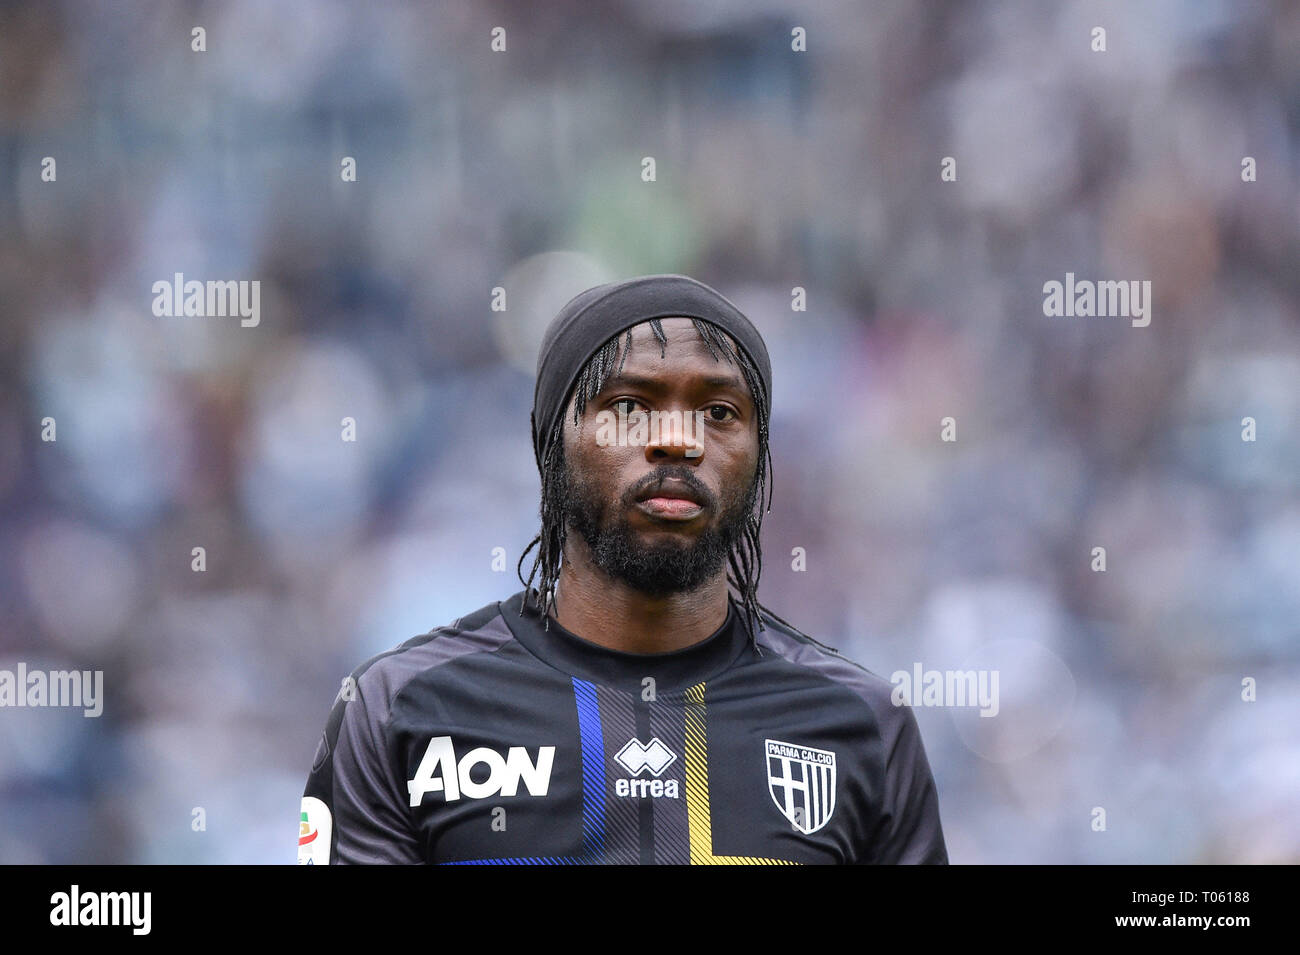 Rome, Italy. 17th Mar, 2019. Gervinho of Parma during the Serie A match between Lazio and Parma Calcio 1913 at Stadio Olimpico, Rome, Italy on 17 March 2019. Photo by Giuseppe Maffia. Credit: UK Sports Pics Ltd/Alamy Live News Stock Photo